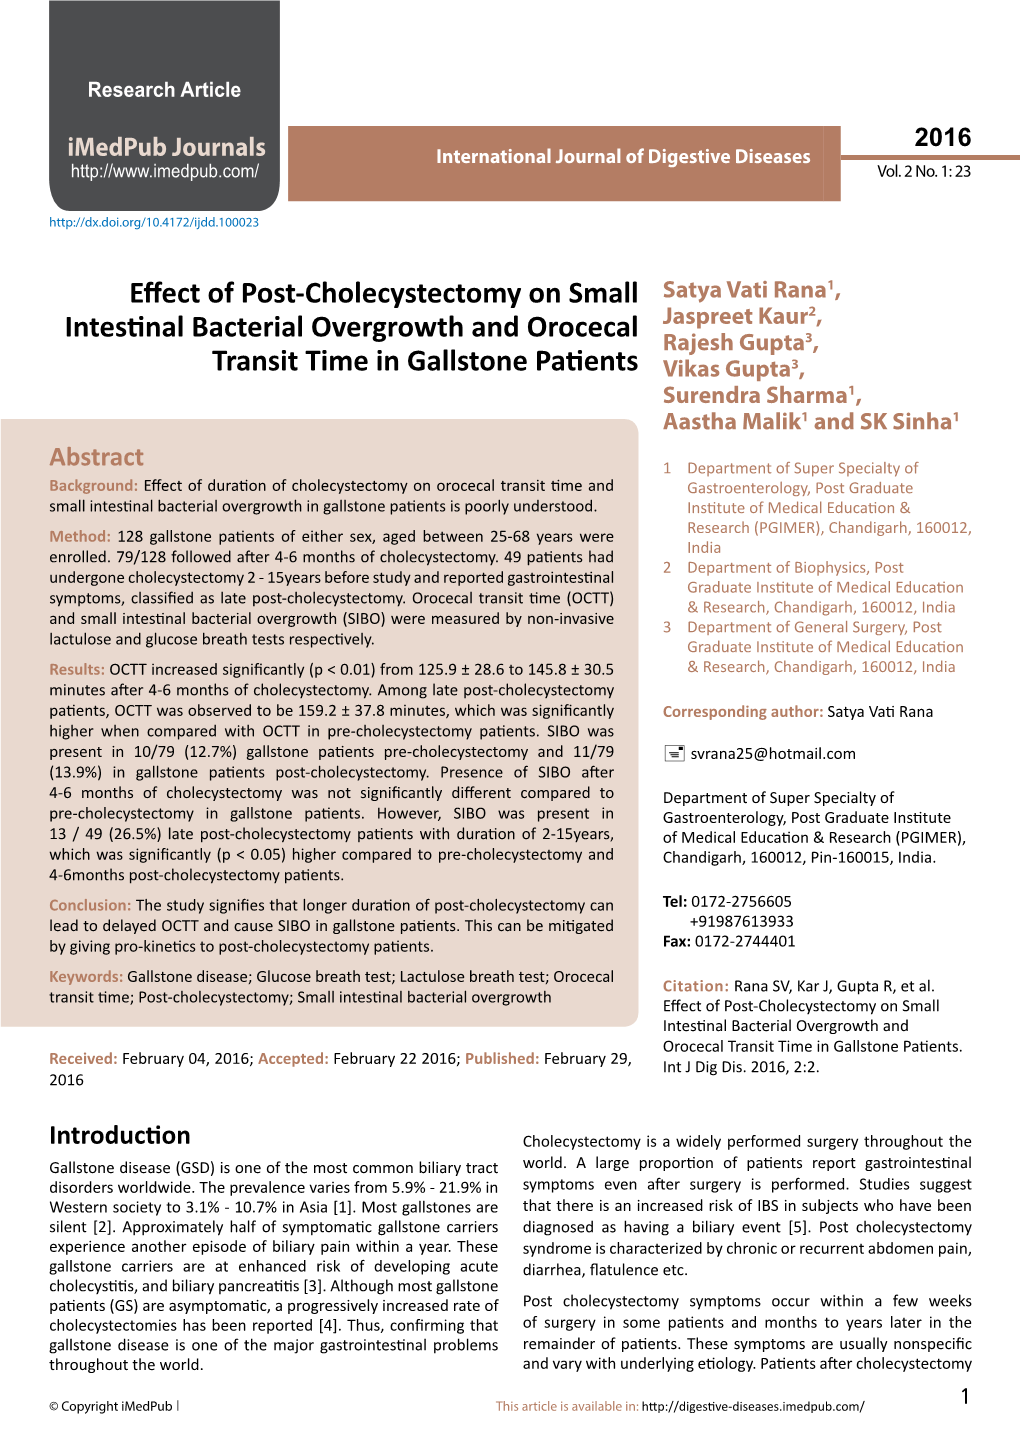 Effect of Post-Cholecystectomy on Small Intestinal Bacterial Overgrowth and Orocecal Transit Time in Gallstone Patients